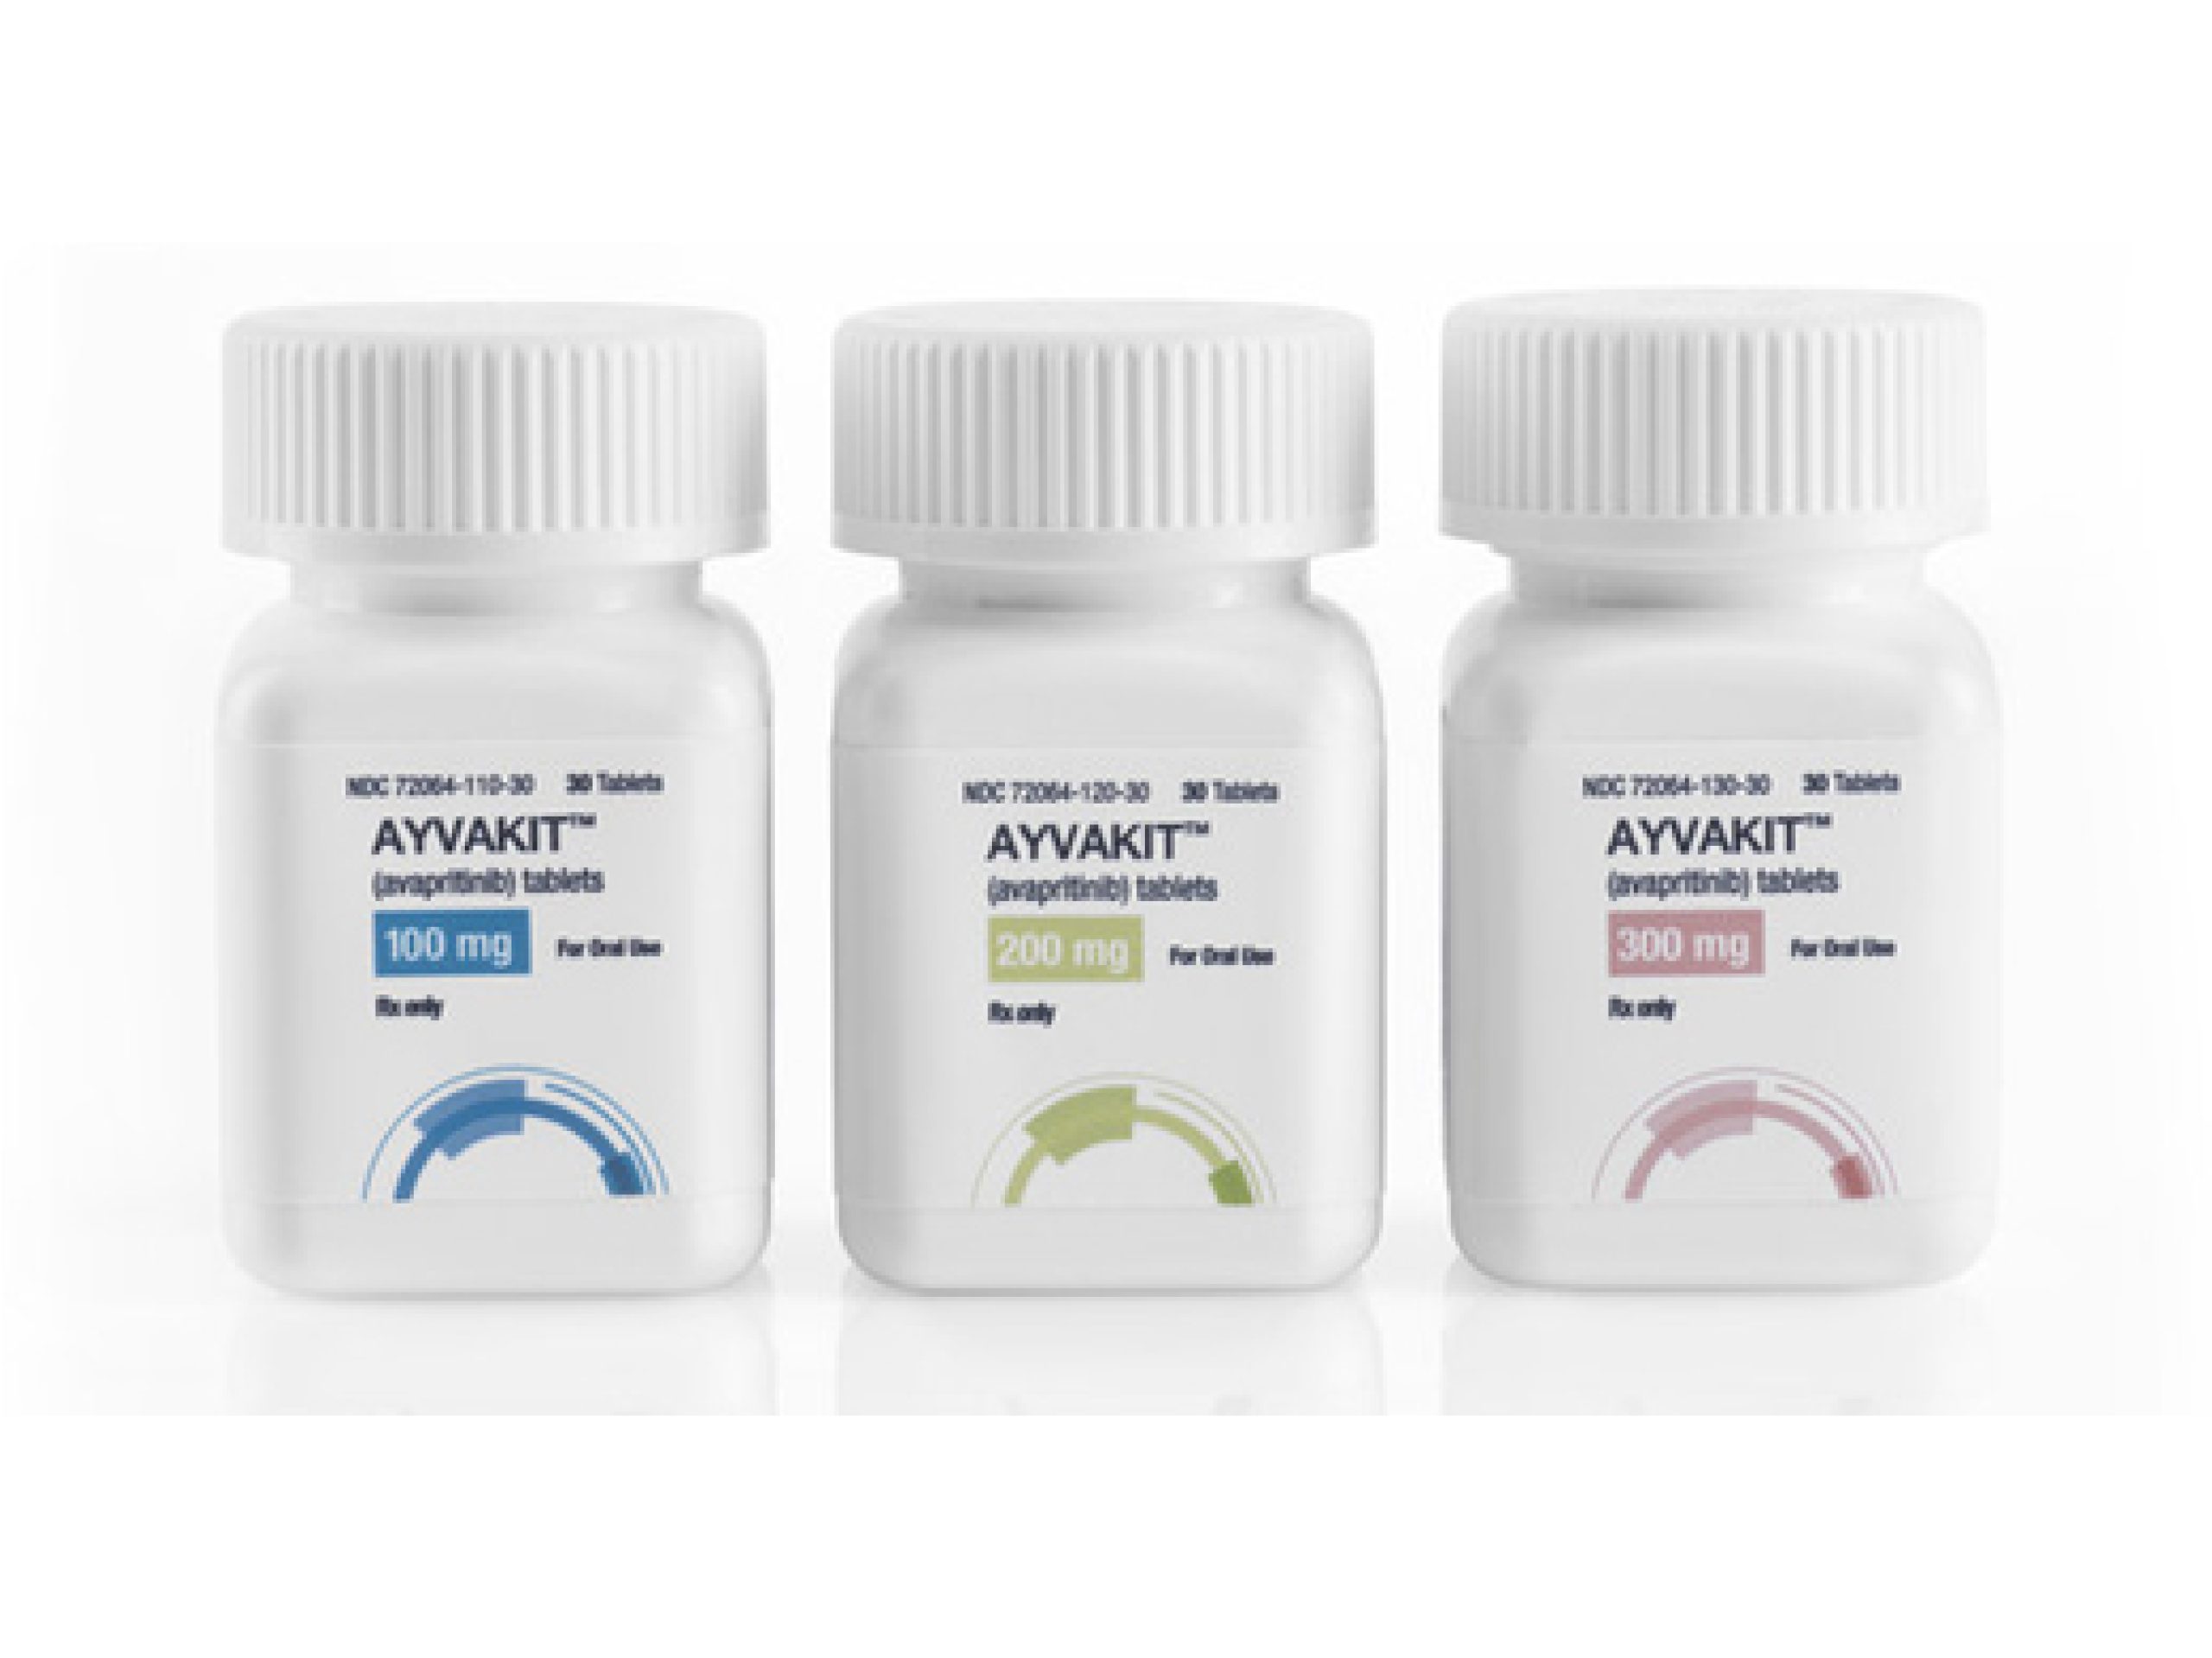 Europe Approves Avapritinib for Rare Mast Cell Disease